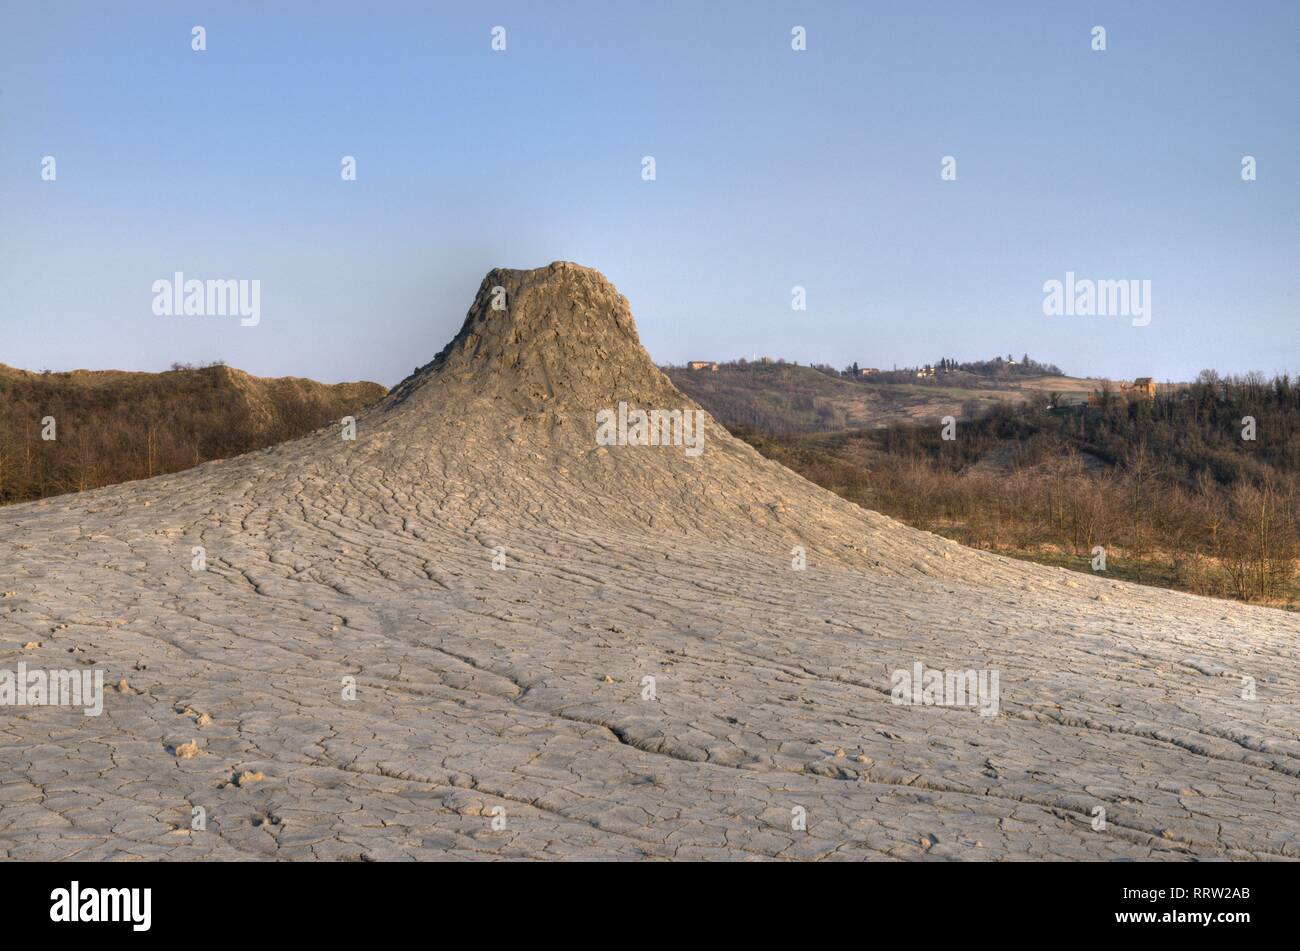 A mud volcano in the Natural Reserve Salse di Nirano. Mud volcanoes and craters in Emilia Romagna, Italy. Stock Photo